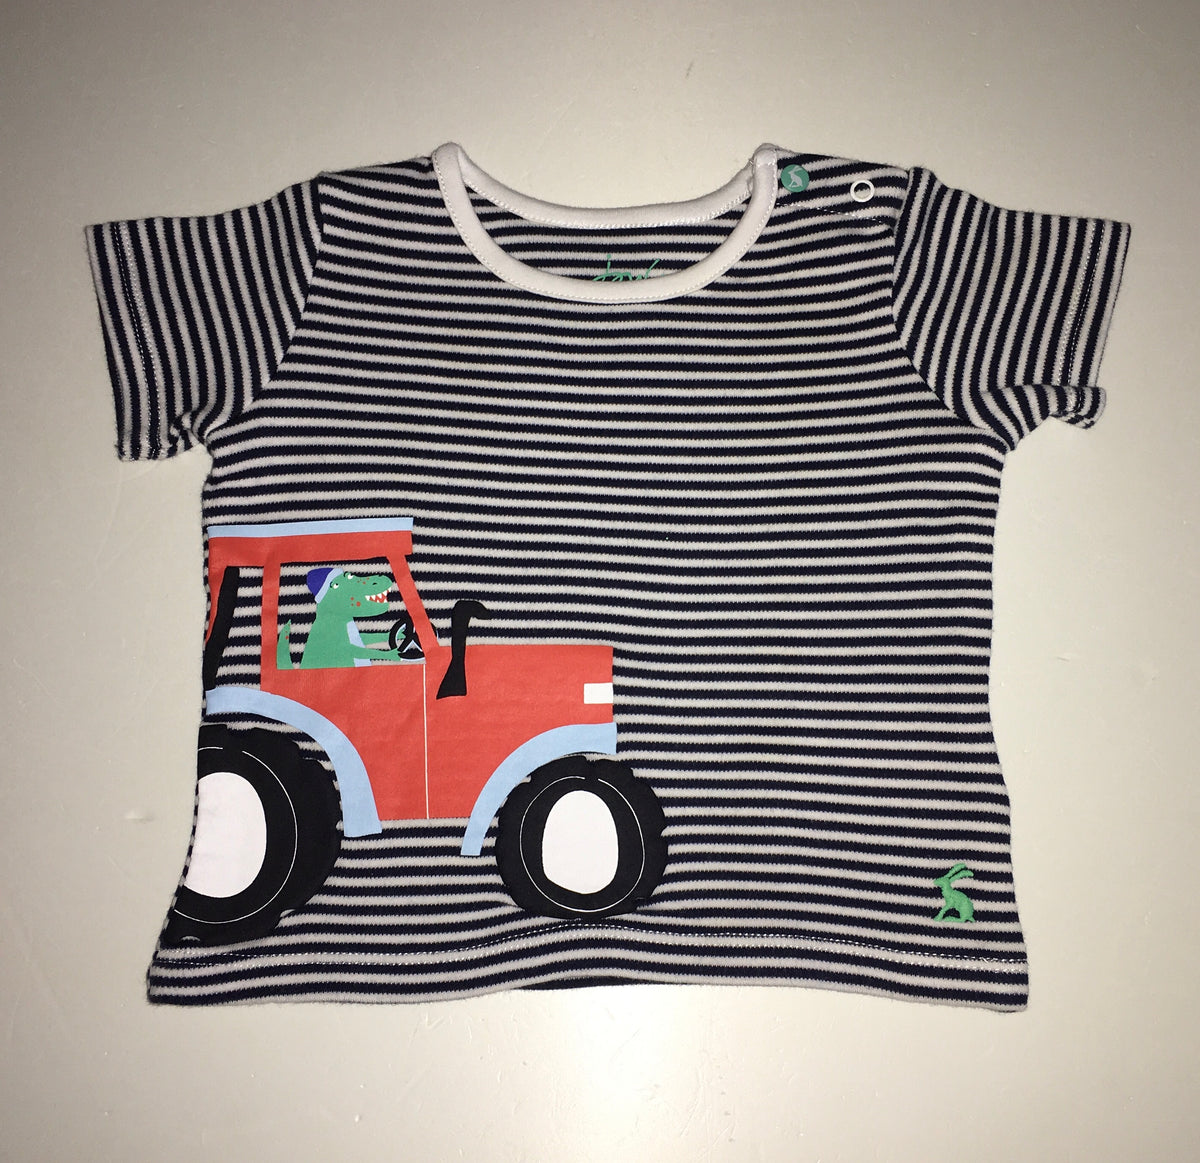 Joules Top, Boys 3-6 Months